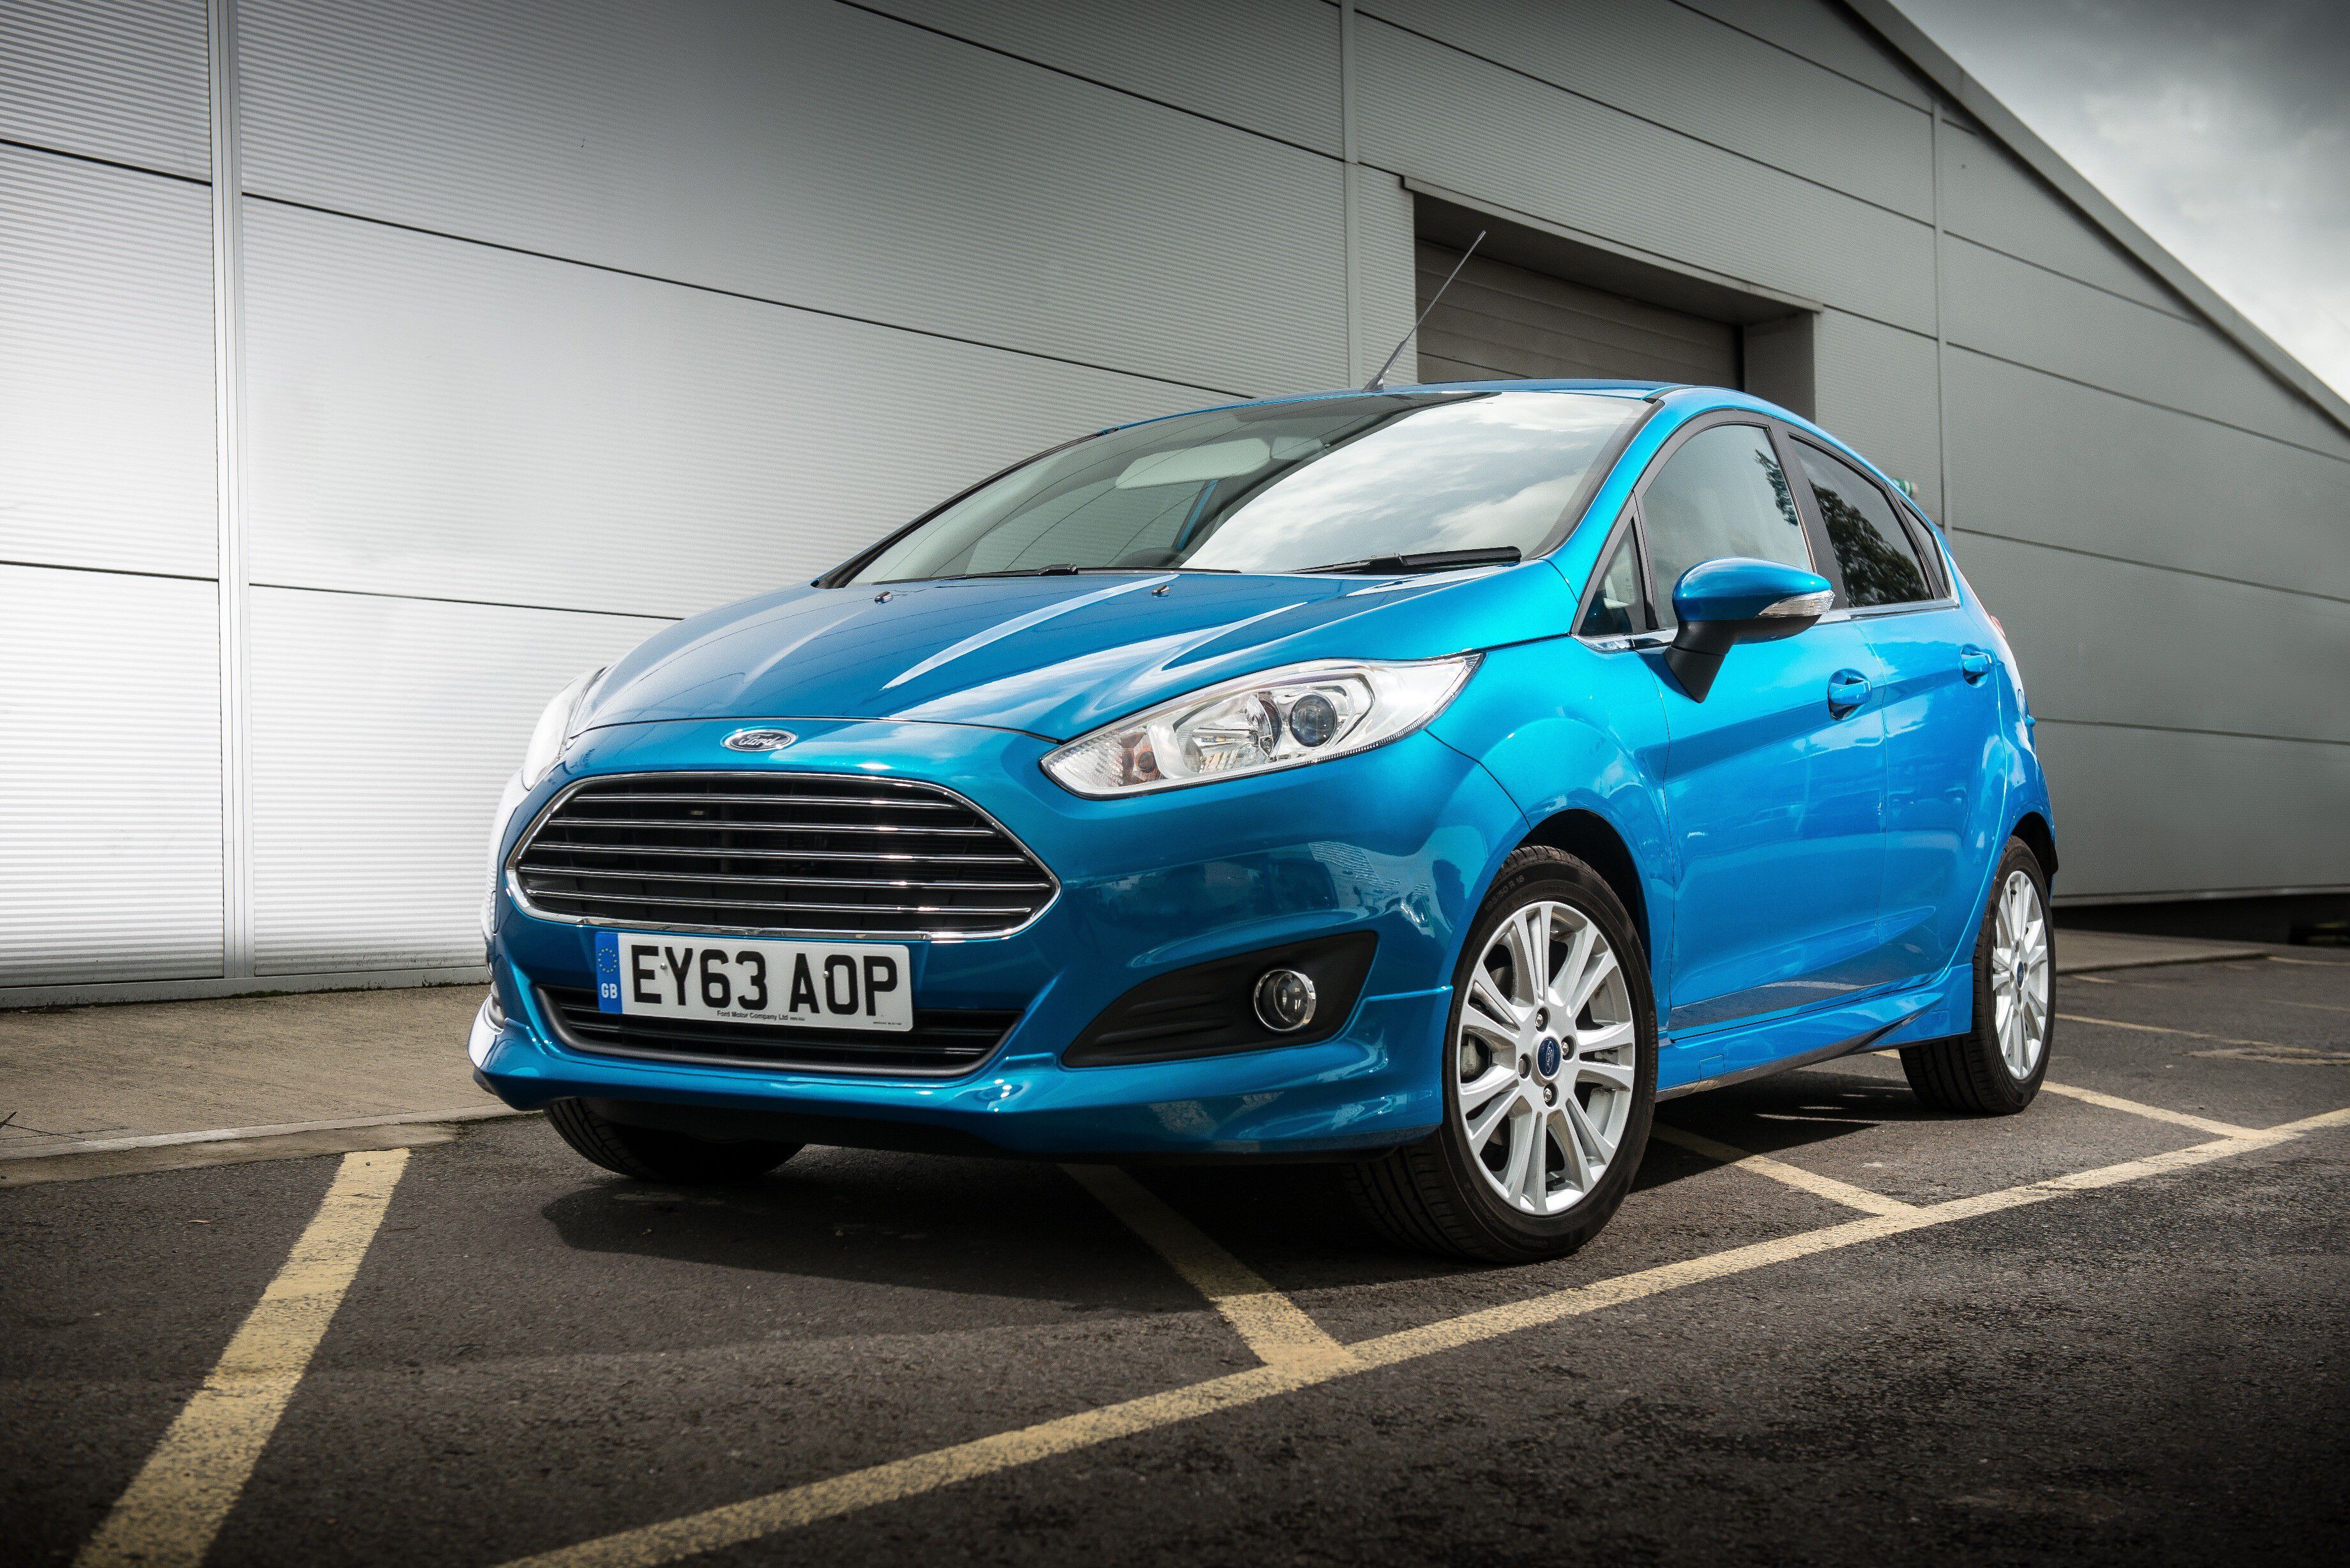 The Facelifted 2013 Ford Fiesta